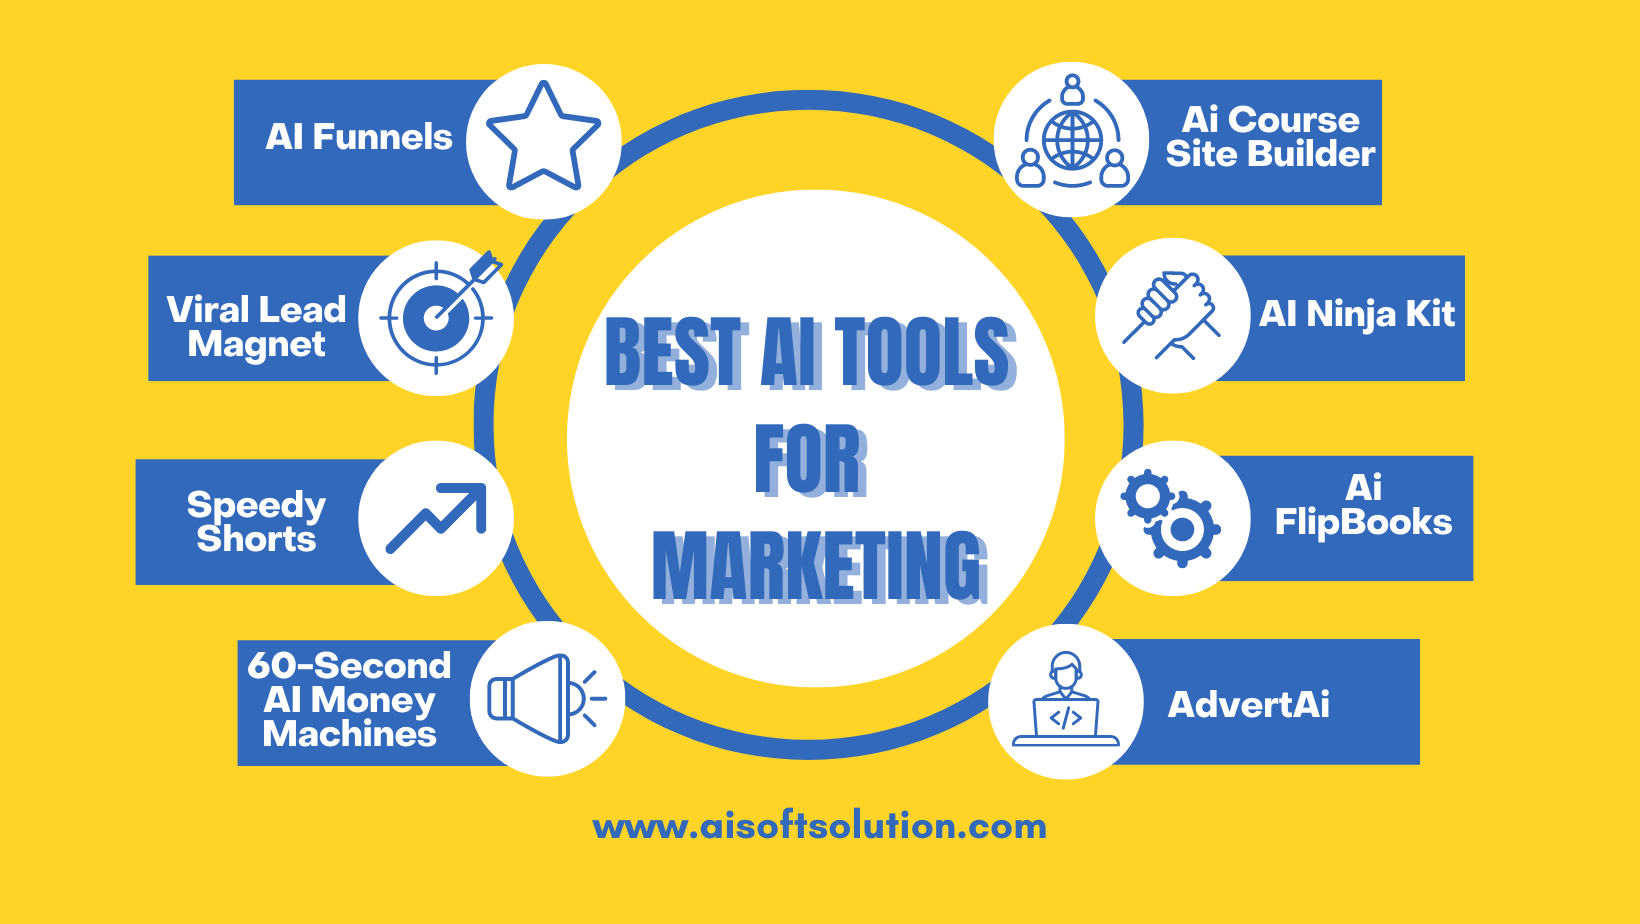 Best AI Tools for Marketing